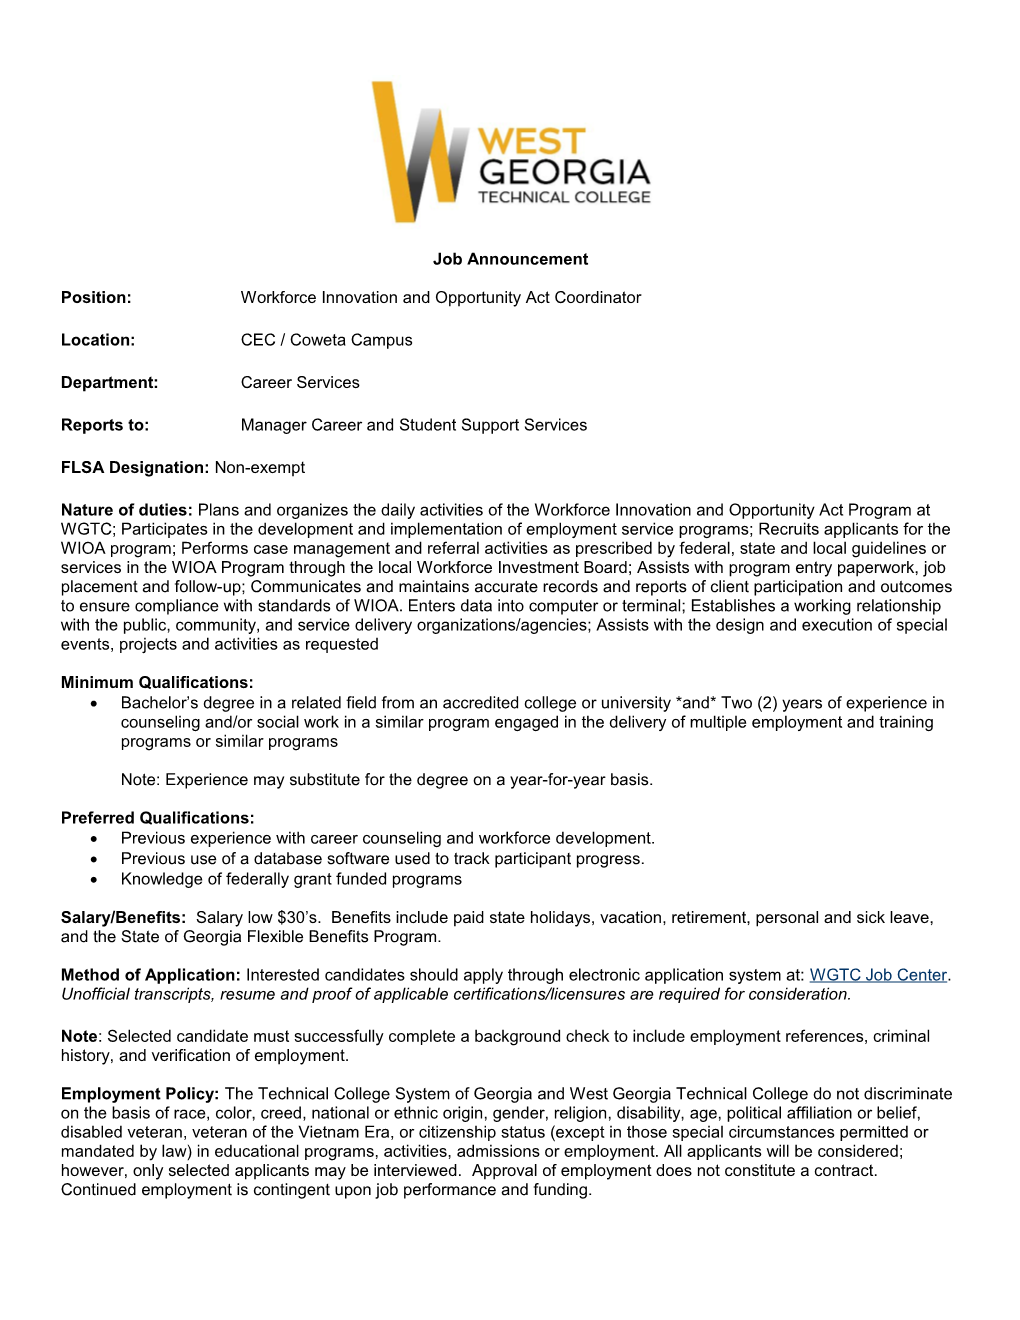 Position: Workforce Innovation and Opportunity Act Coordinator